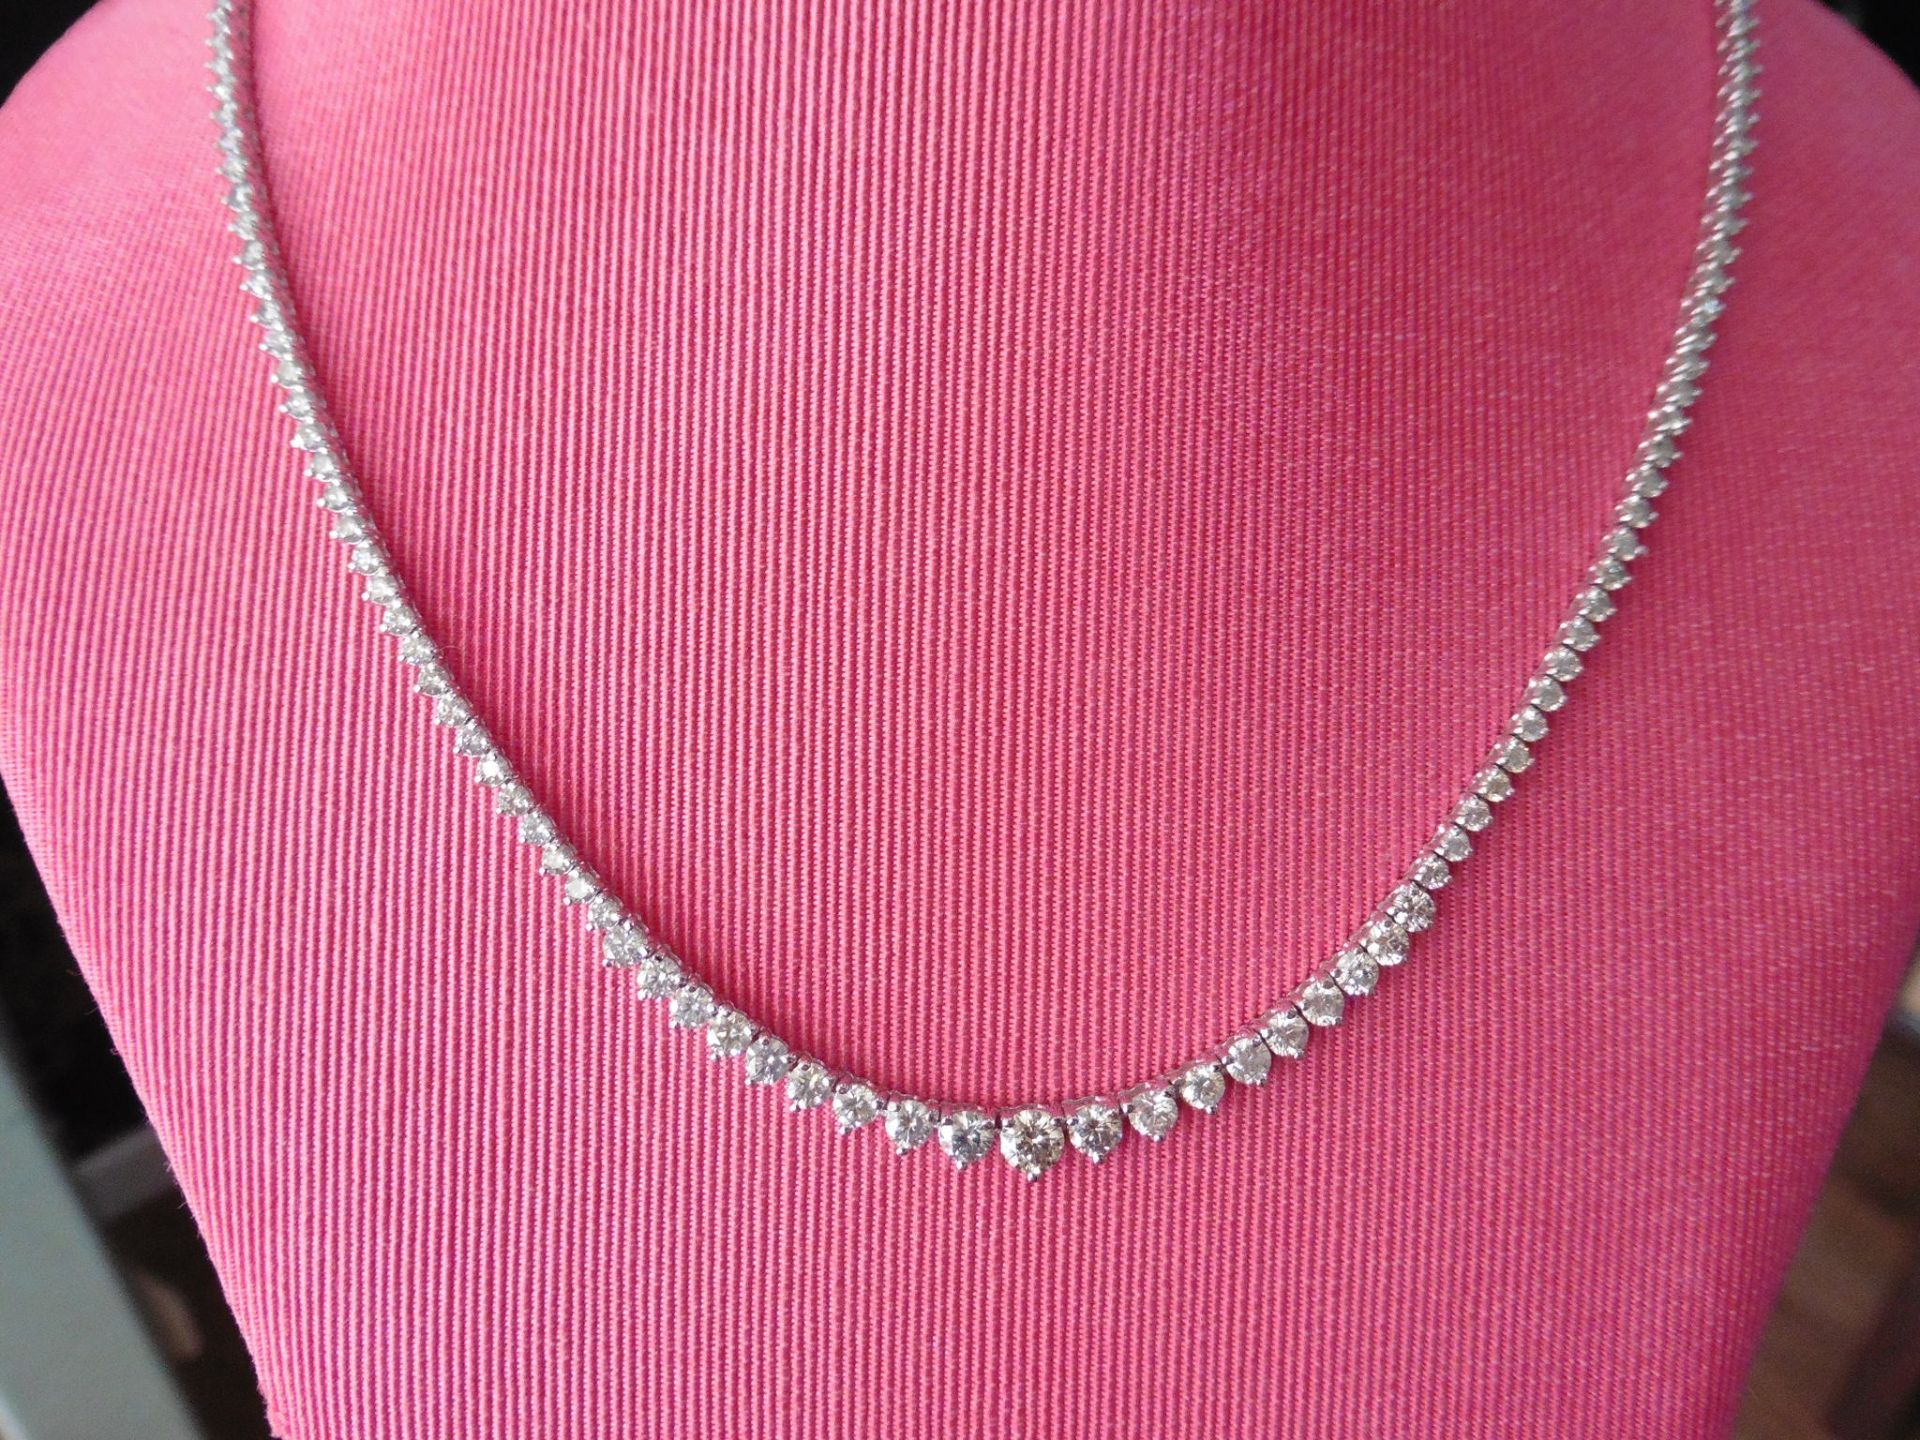 15ct Diamond tennis style necklace. 3 claw setting. Graduated diamonds, I colour, Si2 clarity - Image 5 of 5